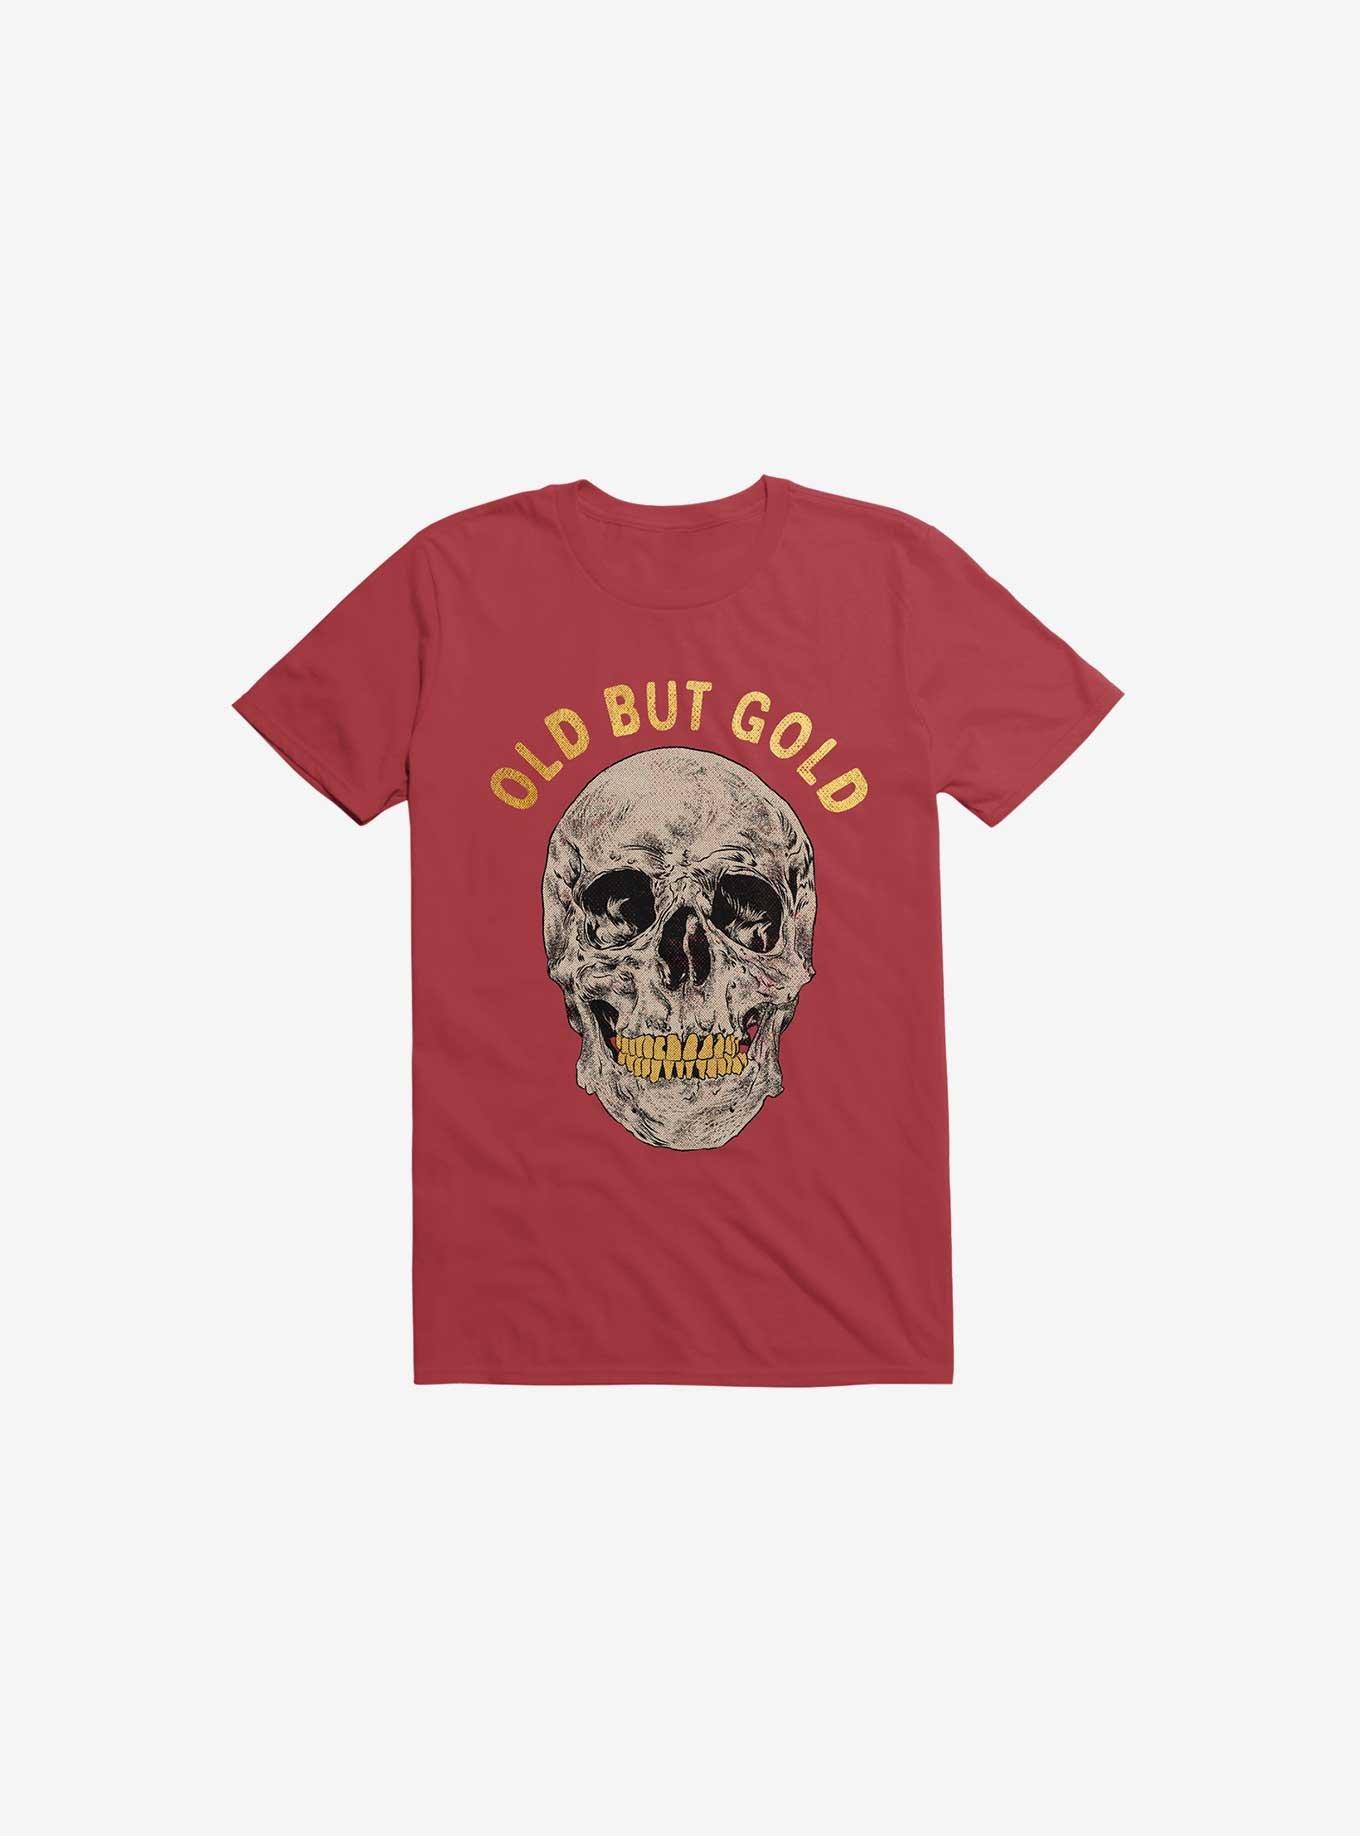 Old But Gold Skull Red T-Shirt